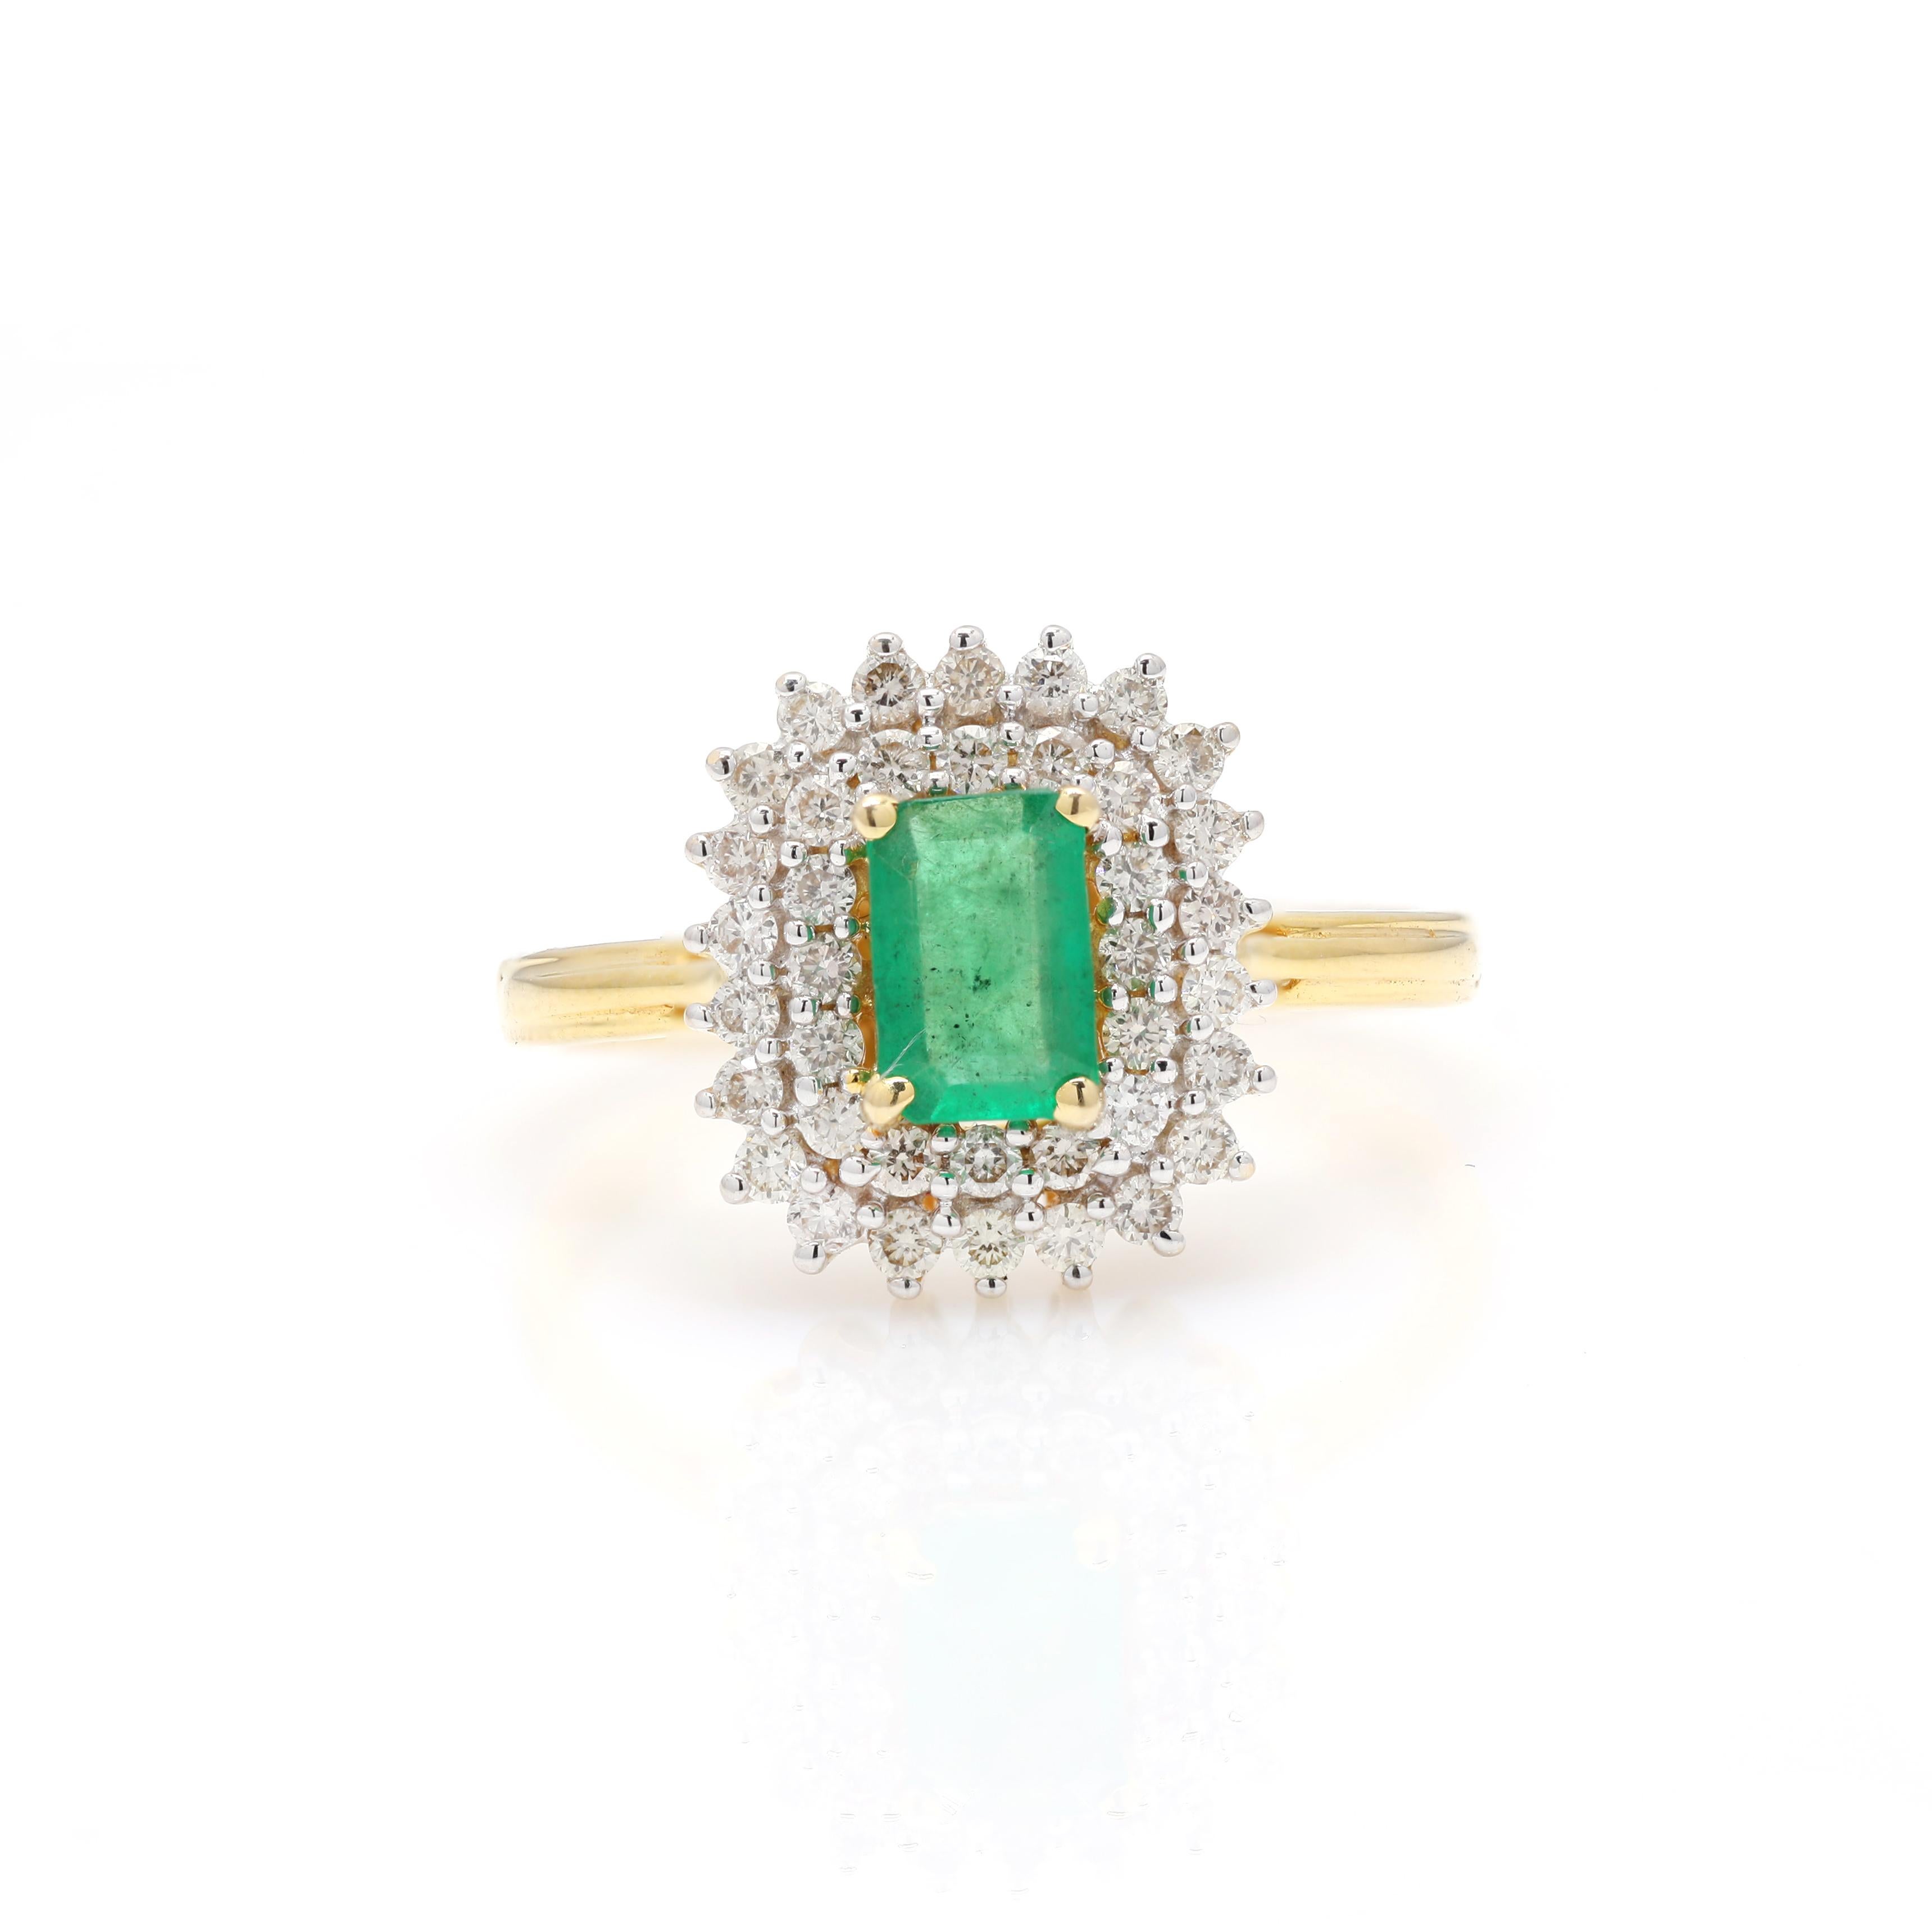 For Sale:  Bespoke Octagon Cut Emerald Amidst of Diamond Wedding Ring in 18k Yellow Gold 3